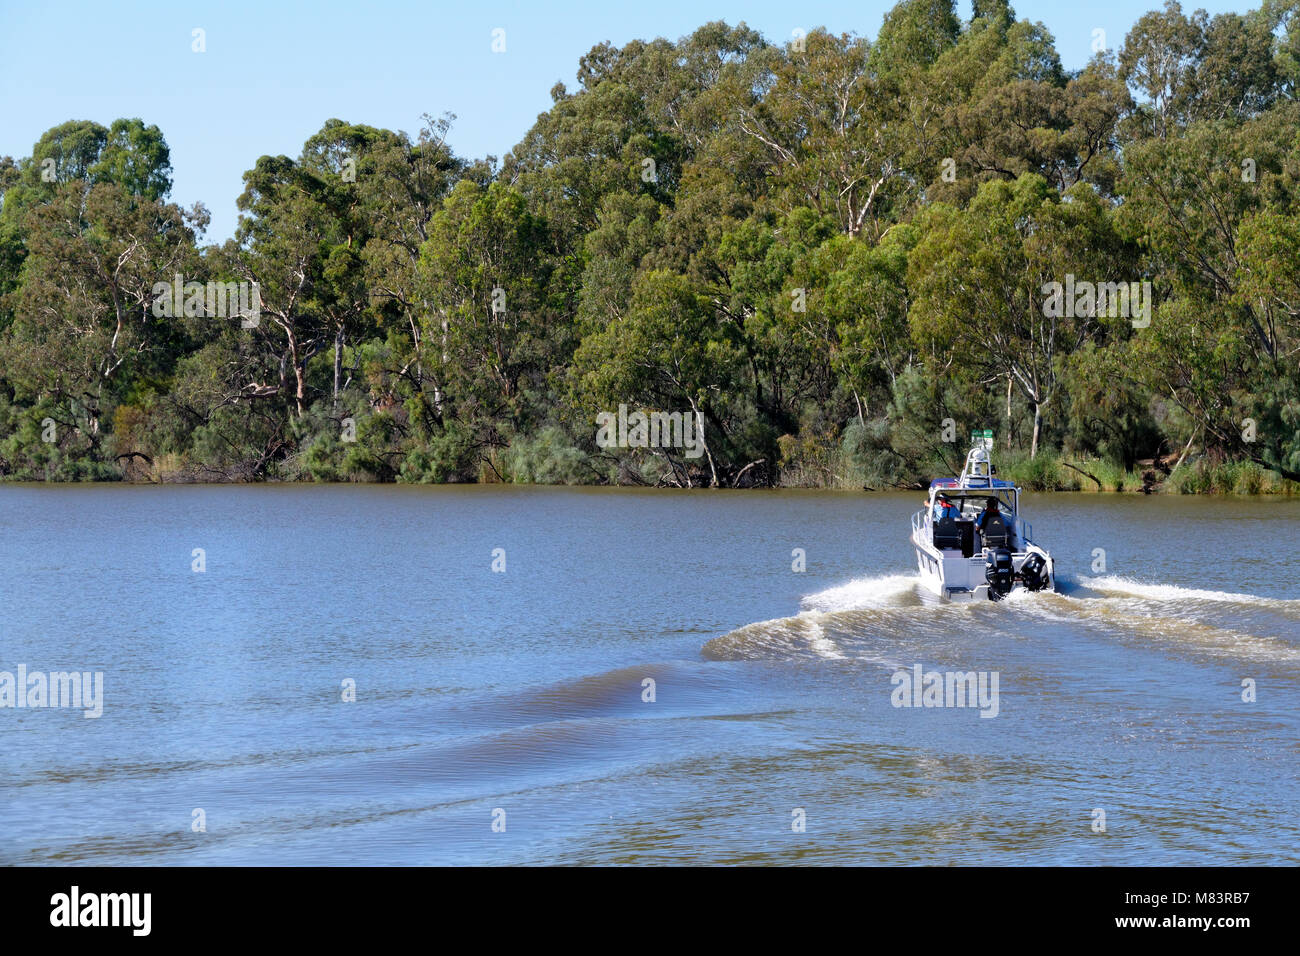 Police boat patrolling the Murray River, New South Wales, Australia. Stock Photo